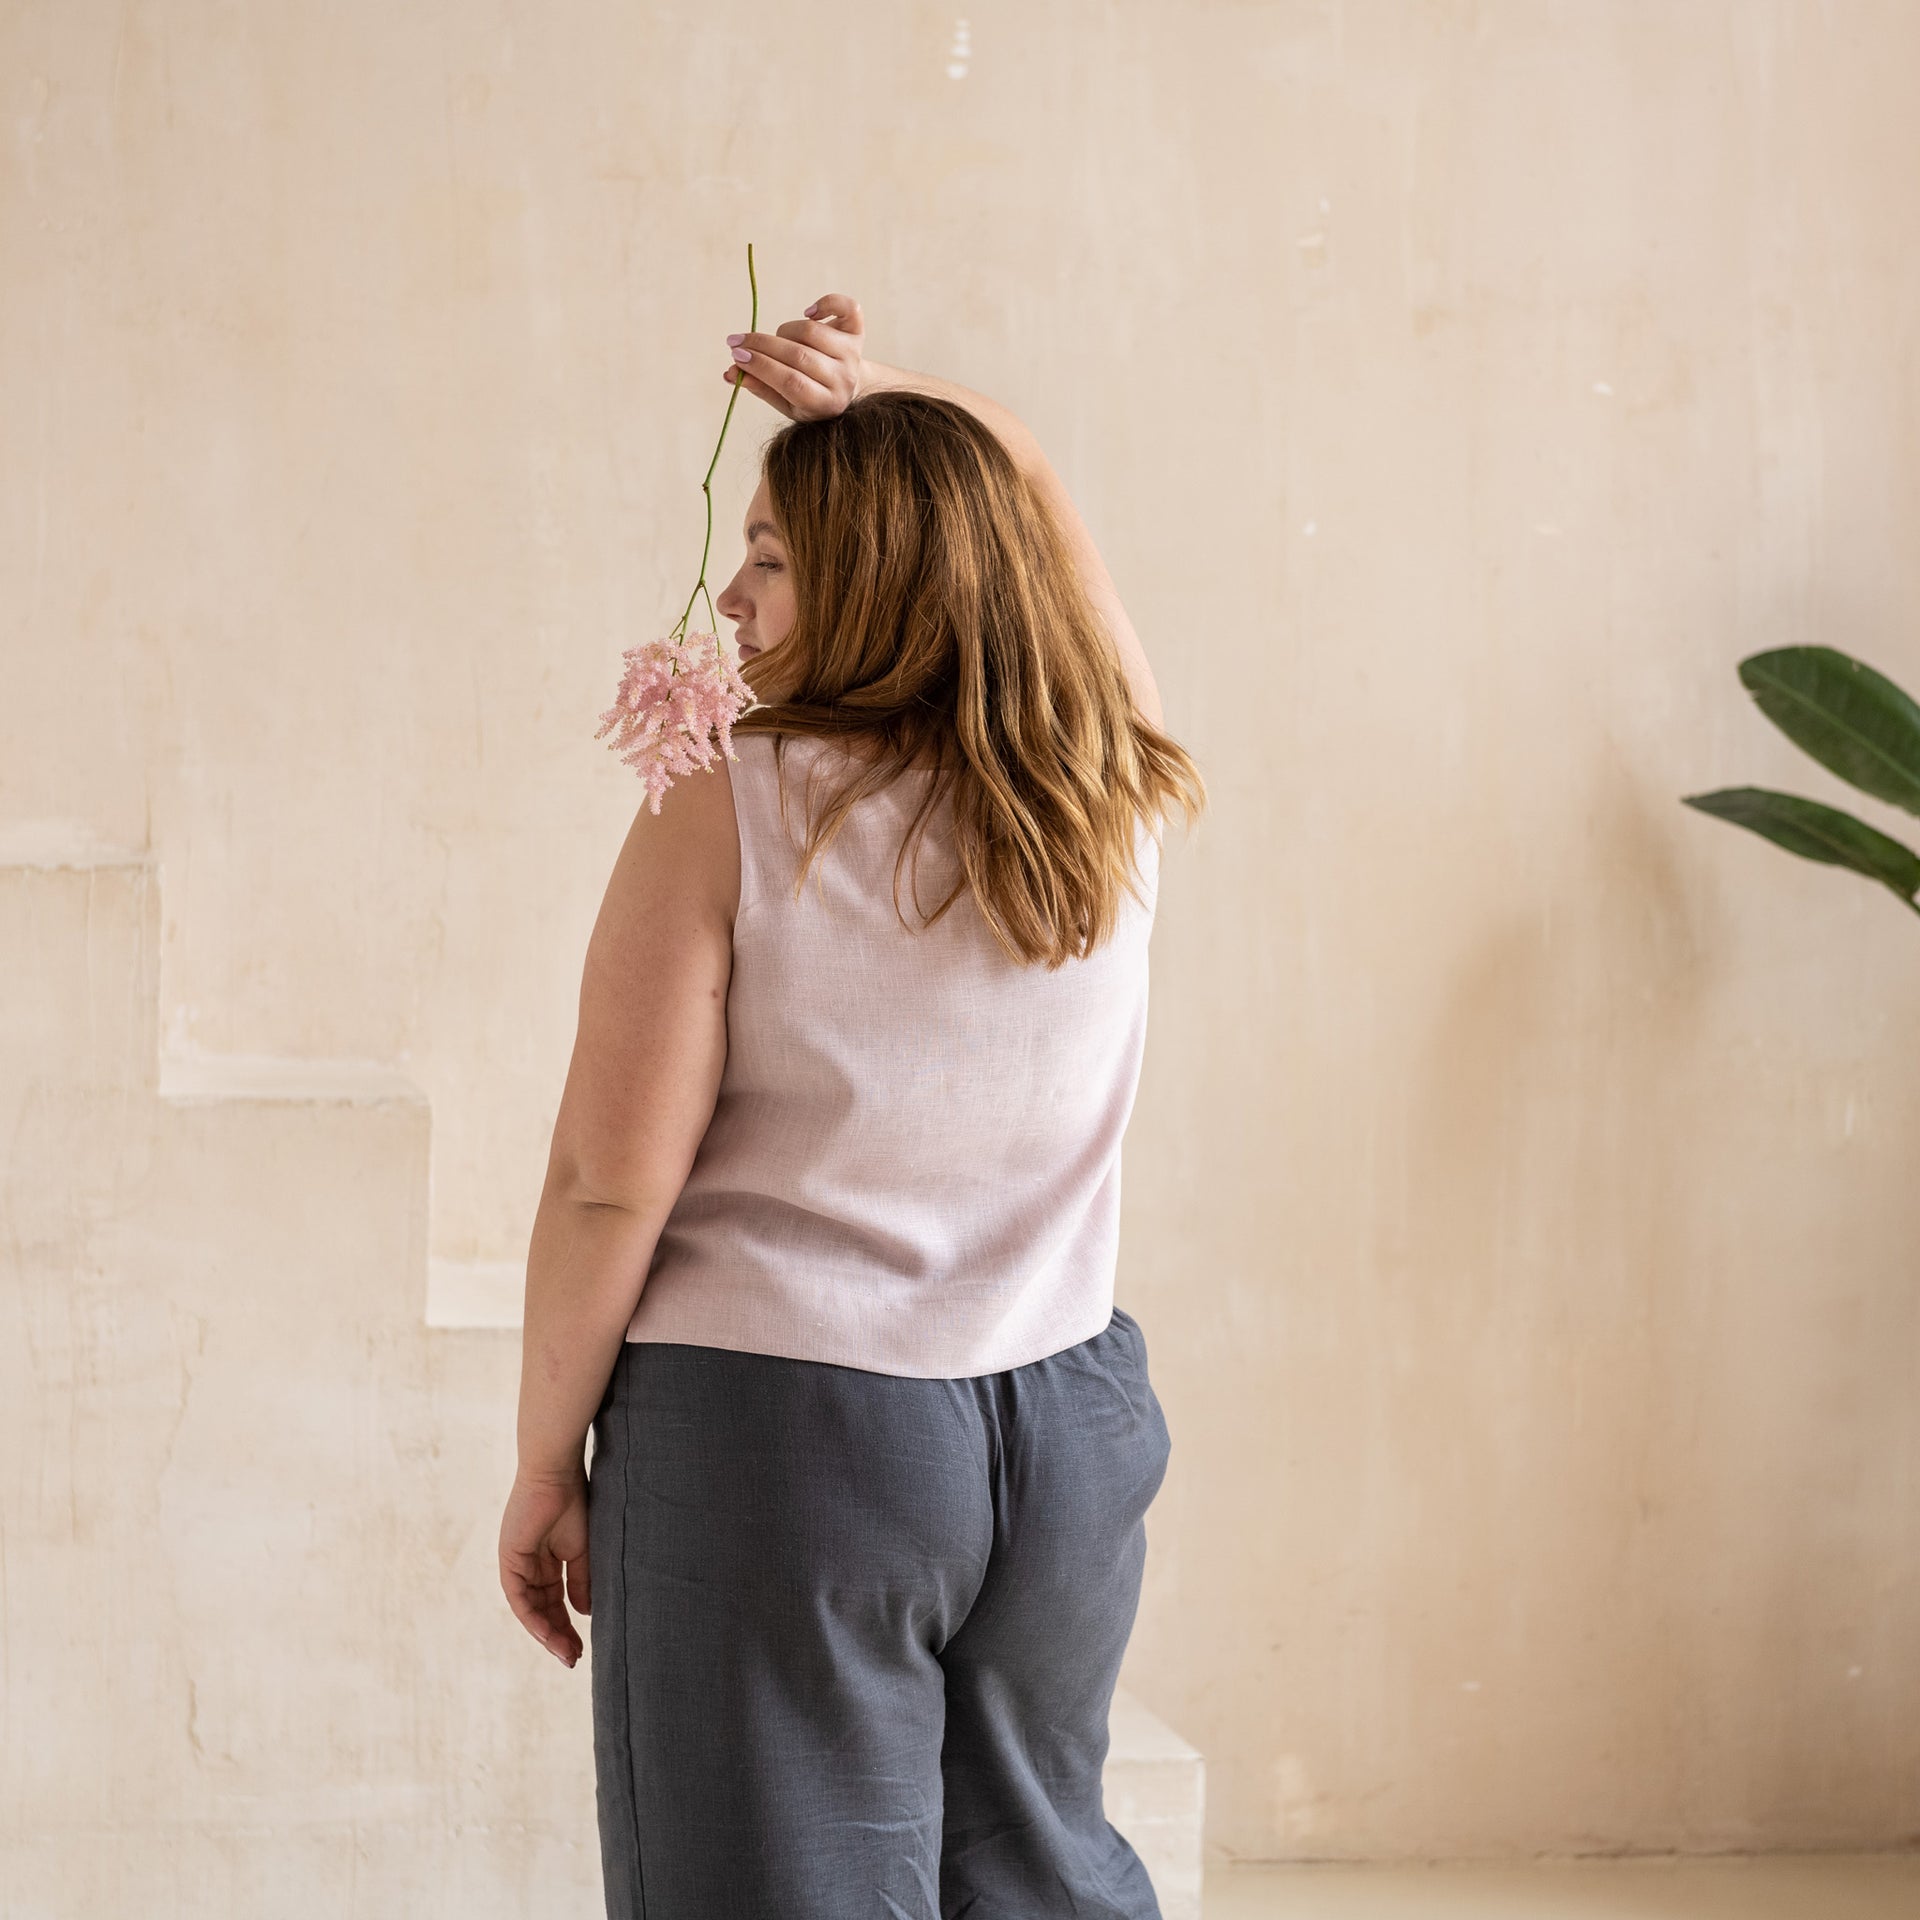 Linen High Waisted Trousers - Elastic Waistband - Washed Linen Fabric